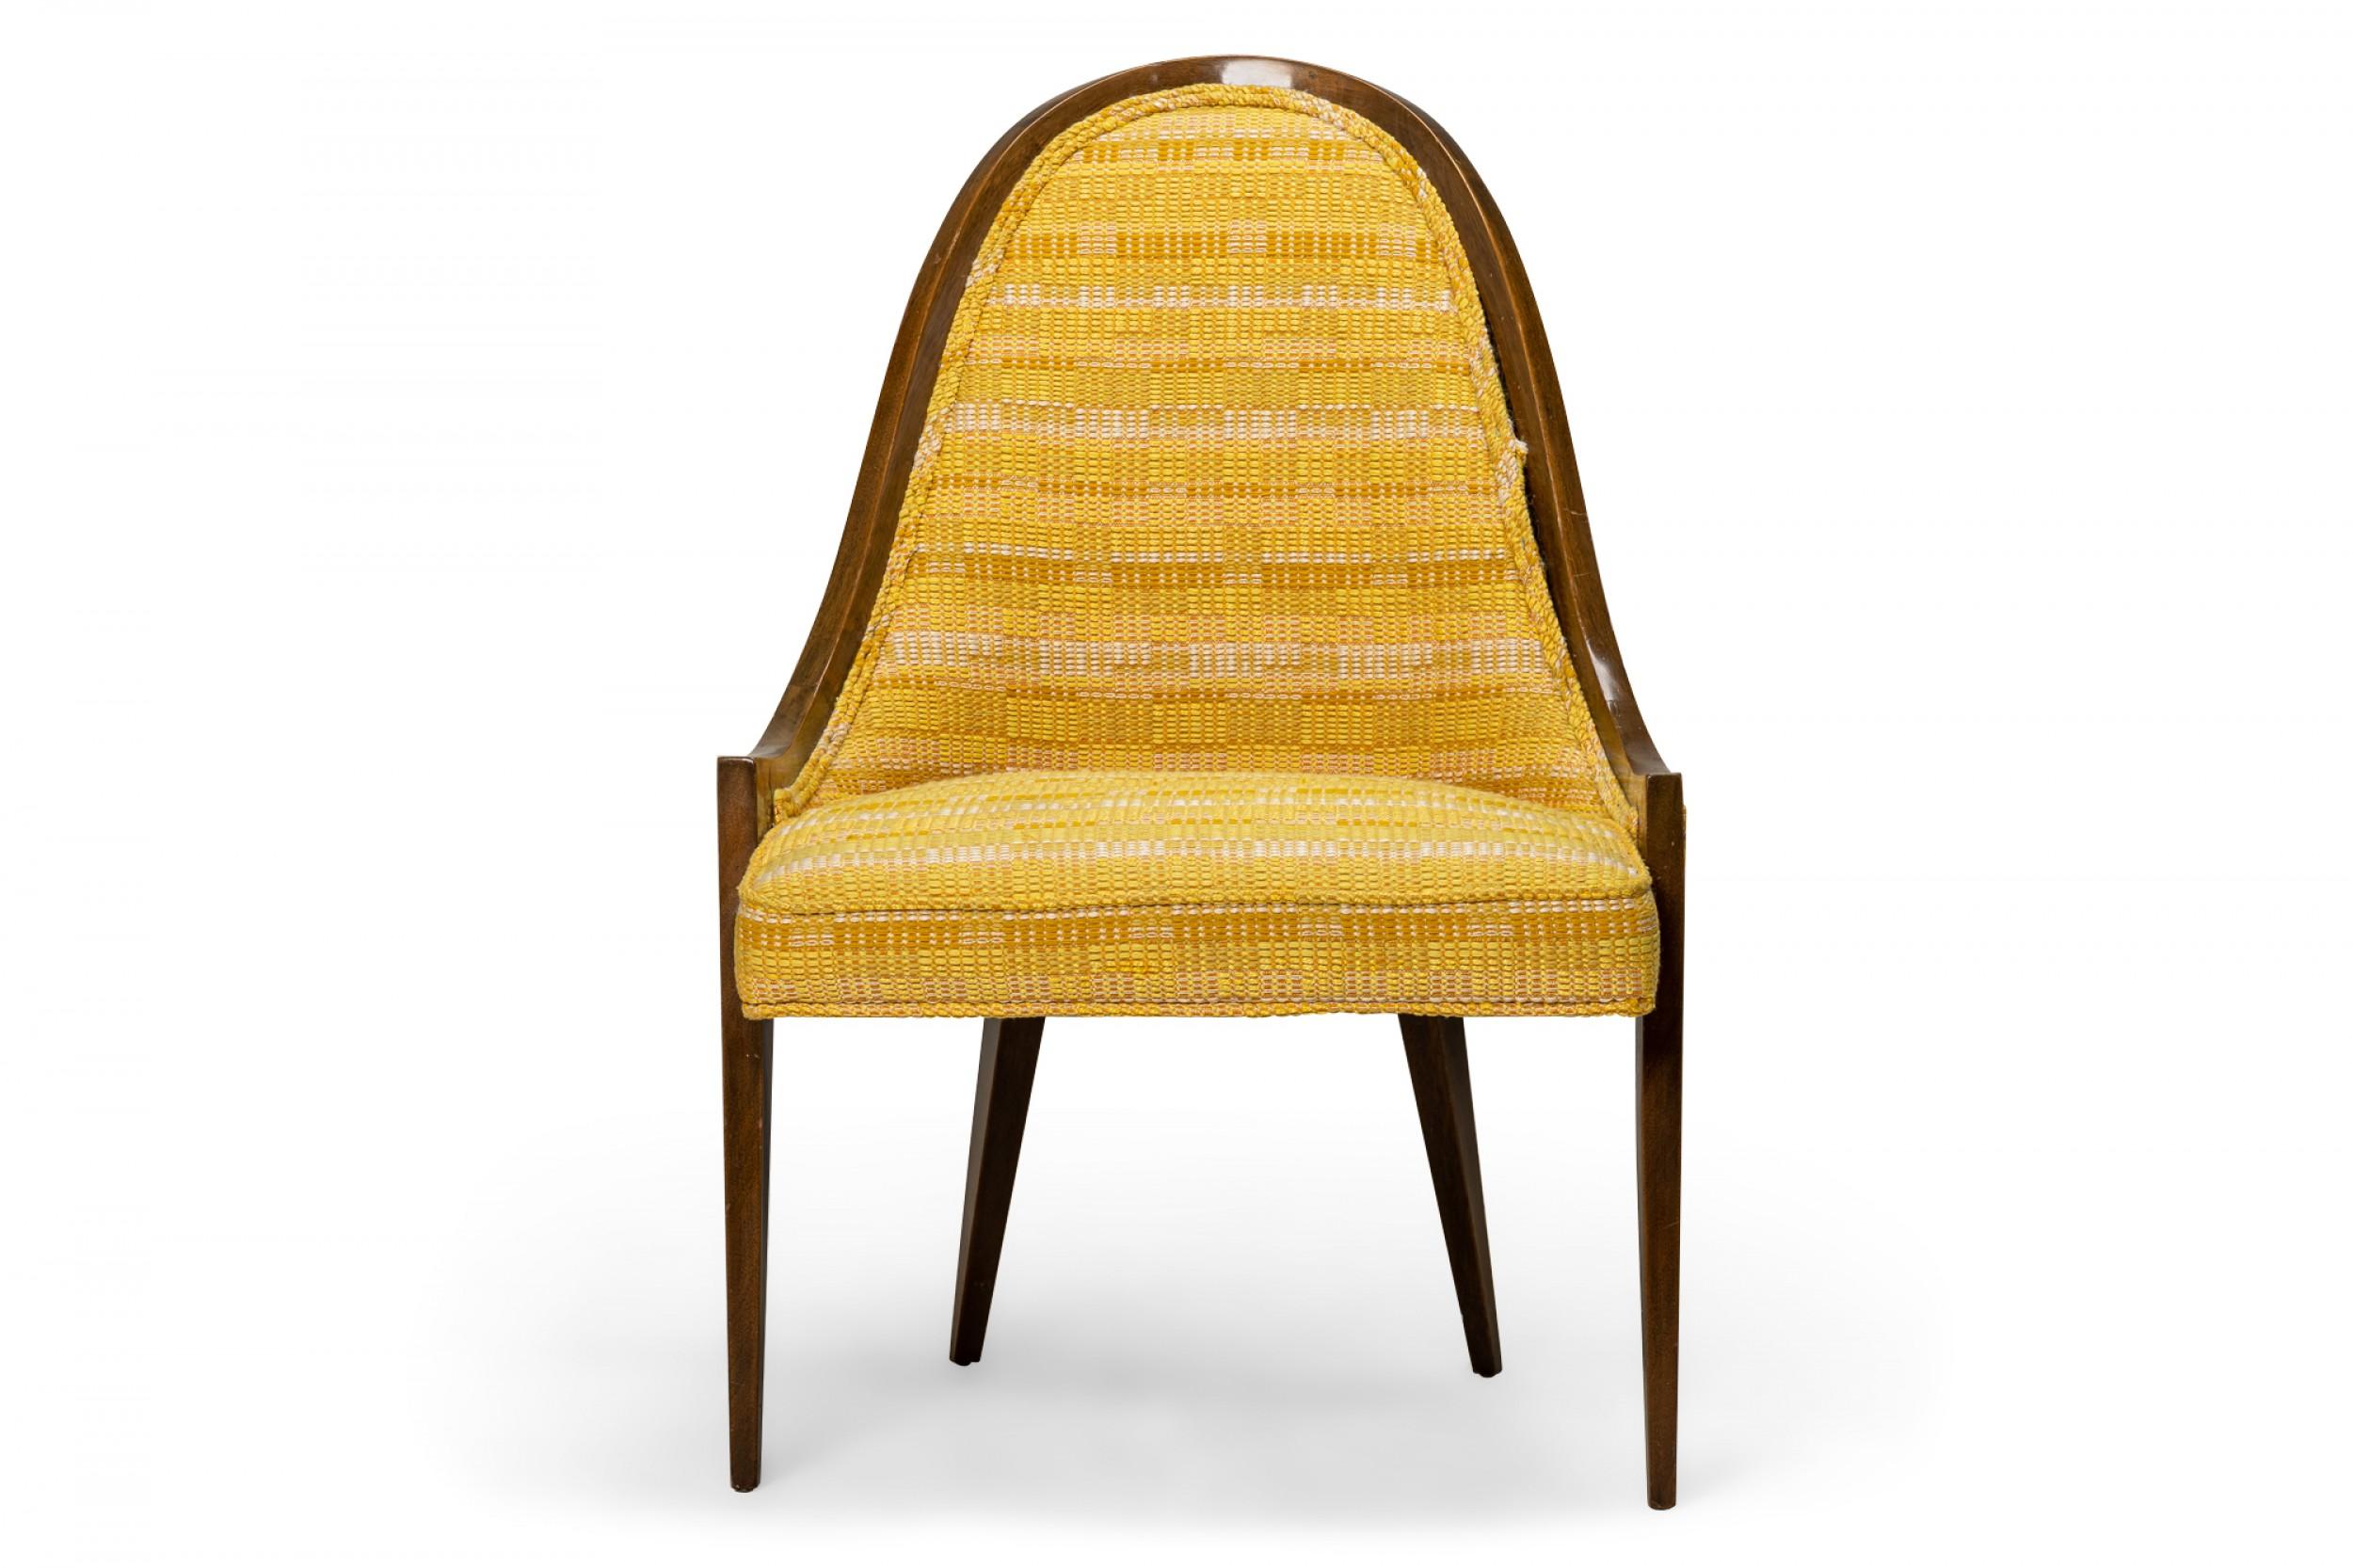 American Mid-Century 'Gondola' pull up / side chair with a curved light mahogany frame and gold woven fabric upholstered seat back and cushion, resting on four tapered mahogany dowel legs. (HARVEY PROBBER)(Similar pieces: DUF0423-DUF0426)
